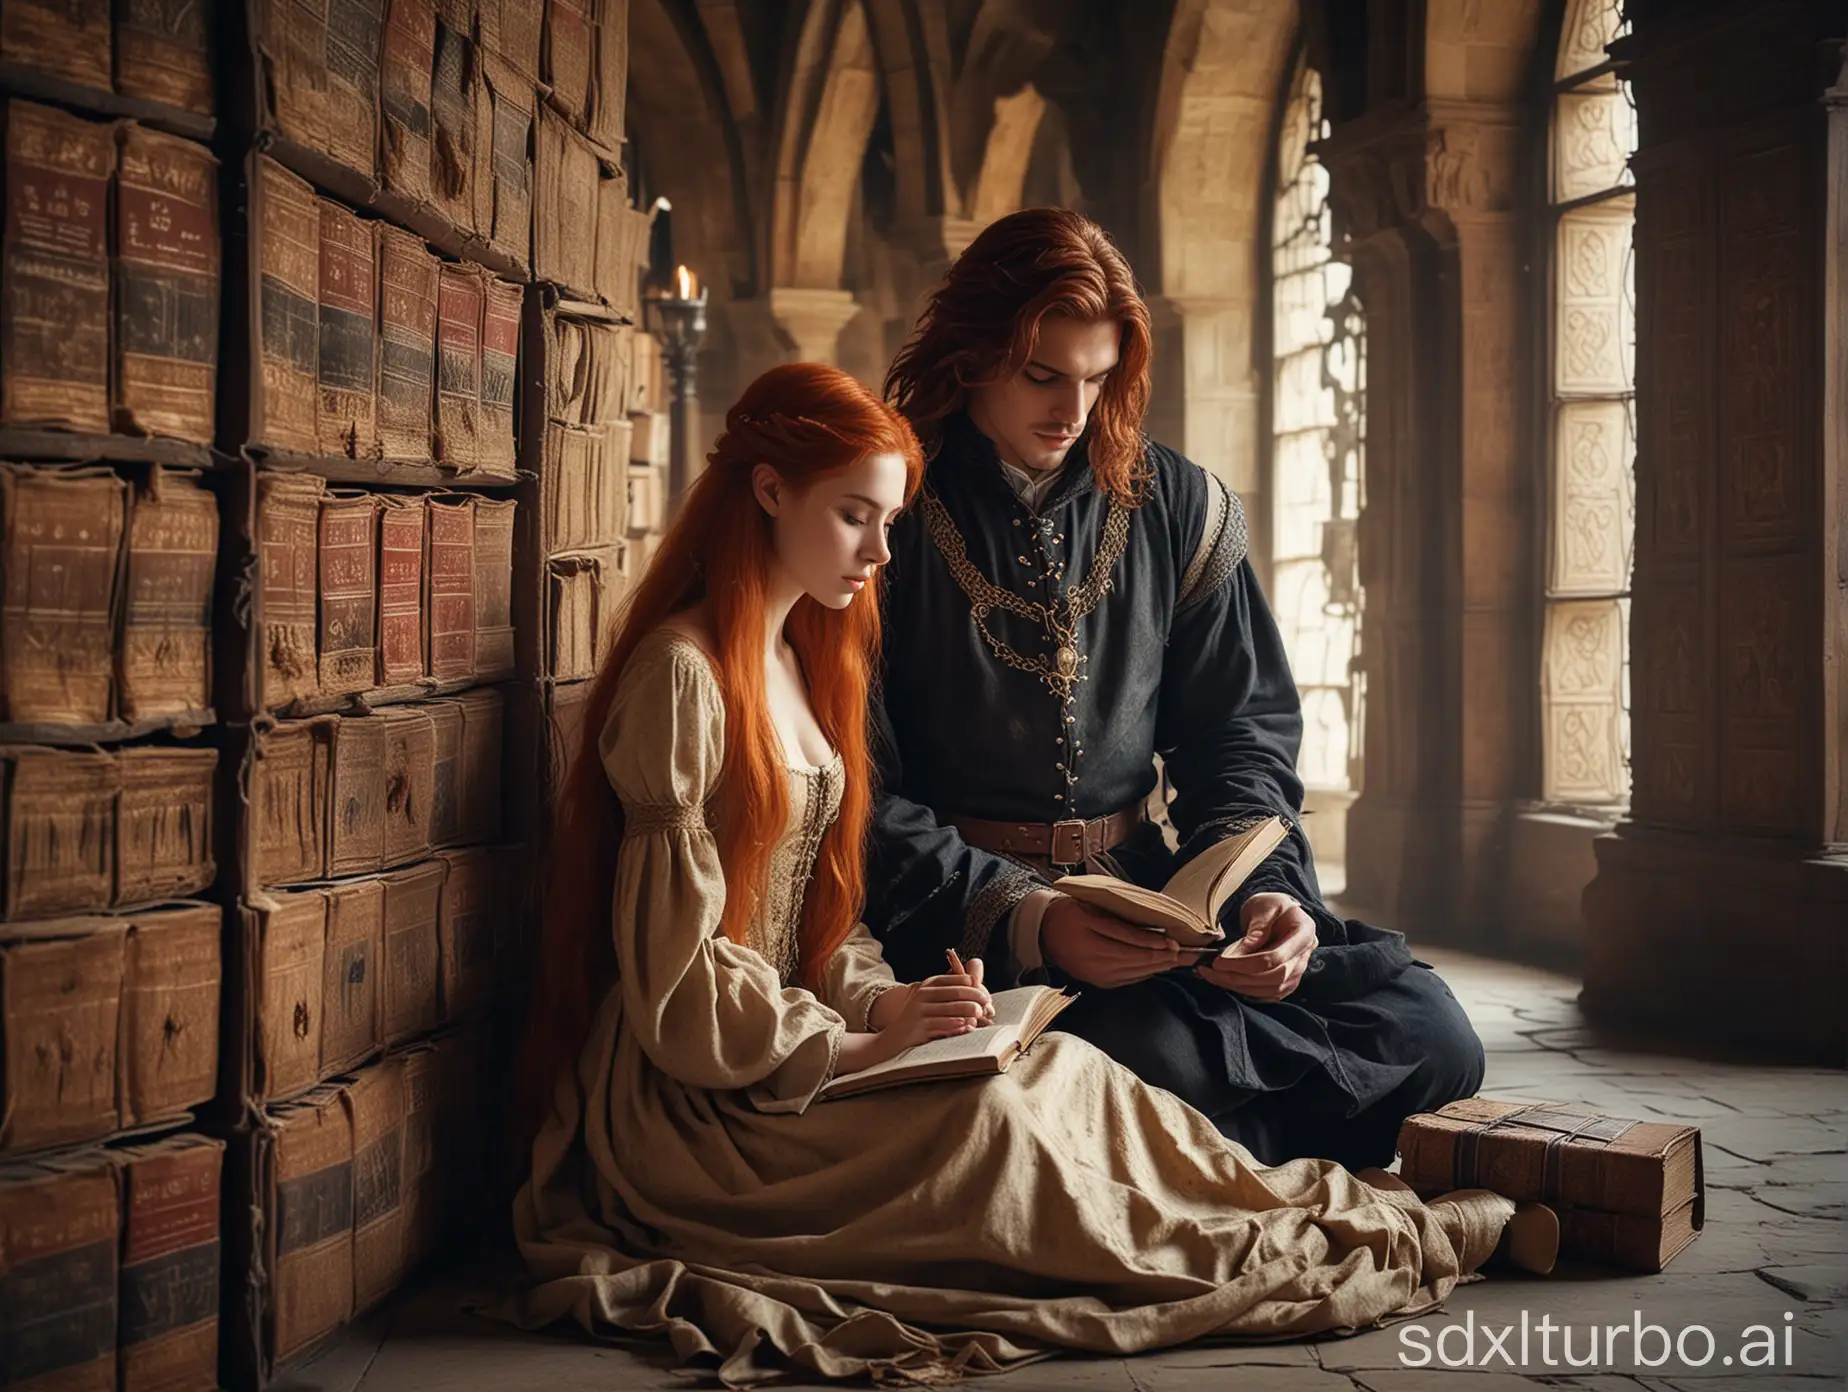 A beautiful girl with long red hair in a (((medieval))))dress and a handsome guy with dark hair in (((medieval ))) nice clothes, sit, engrossed in reading an old ancient folio, in an ancient library amidst many ancient books